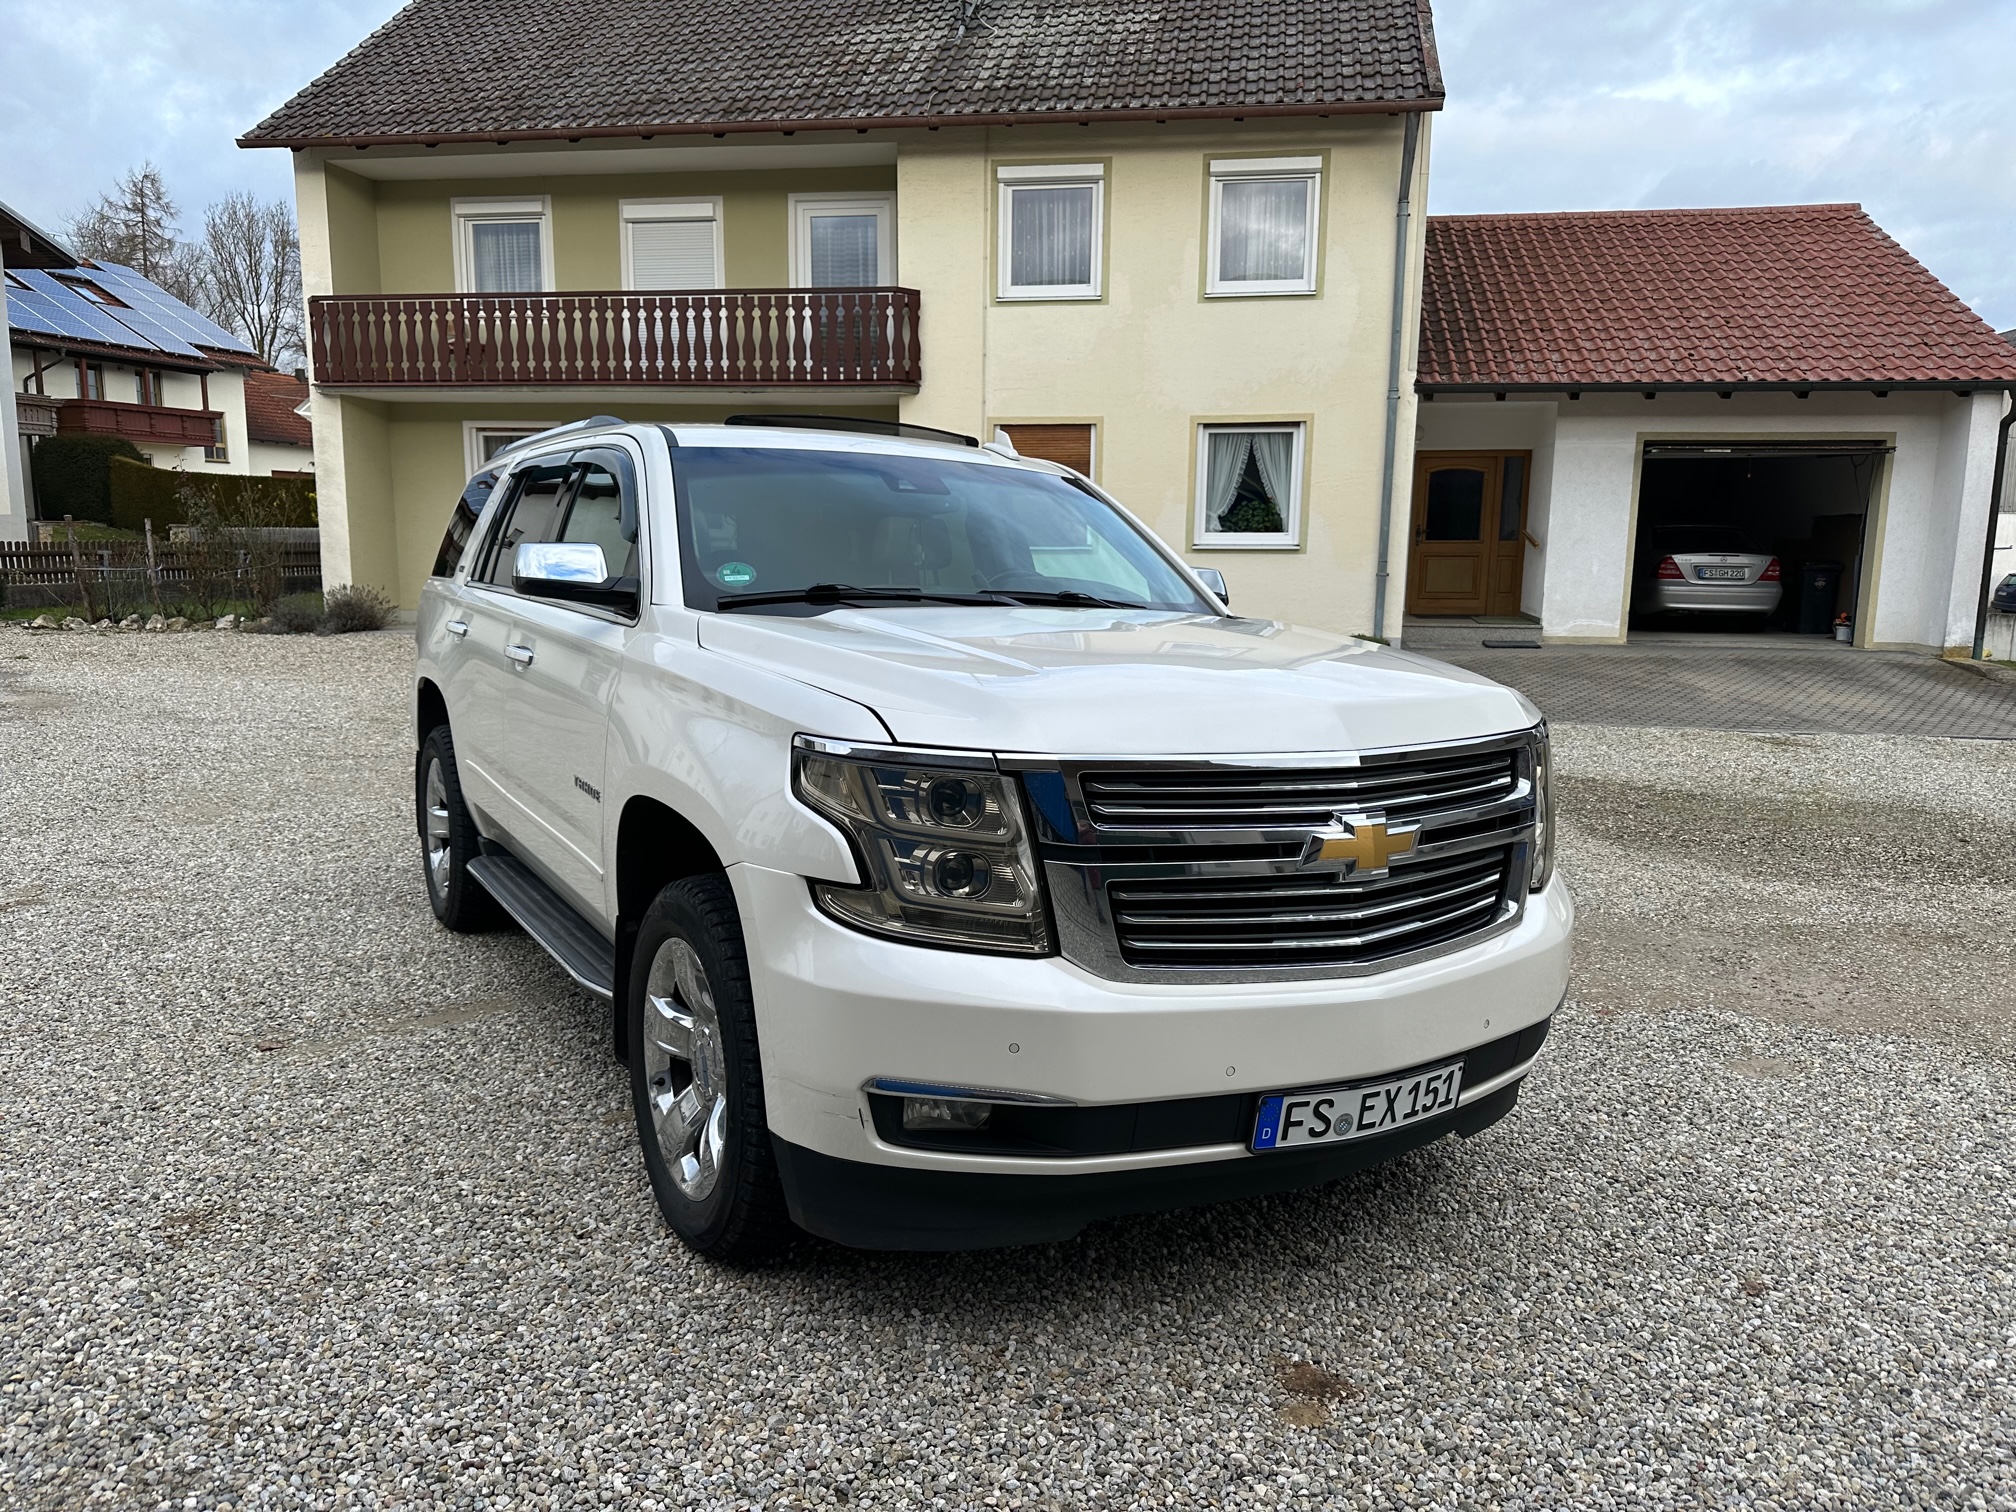 2015 Chevy Tahoe 4x4 a Vendre